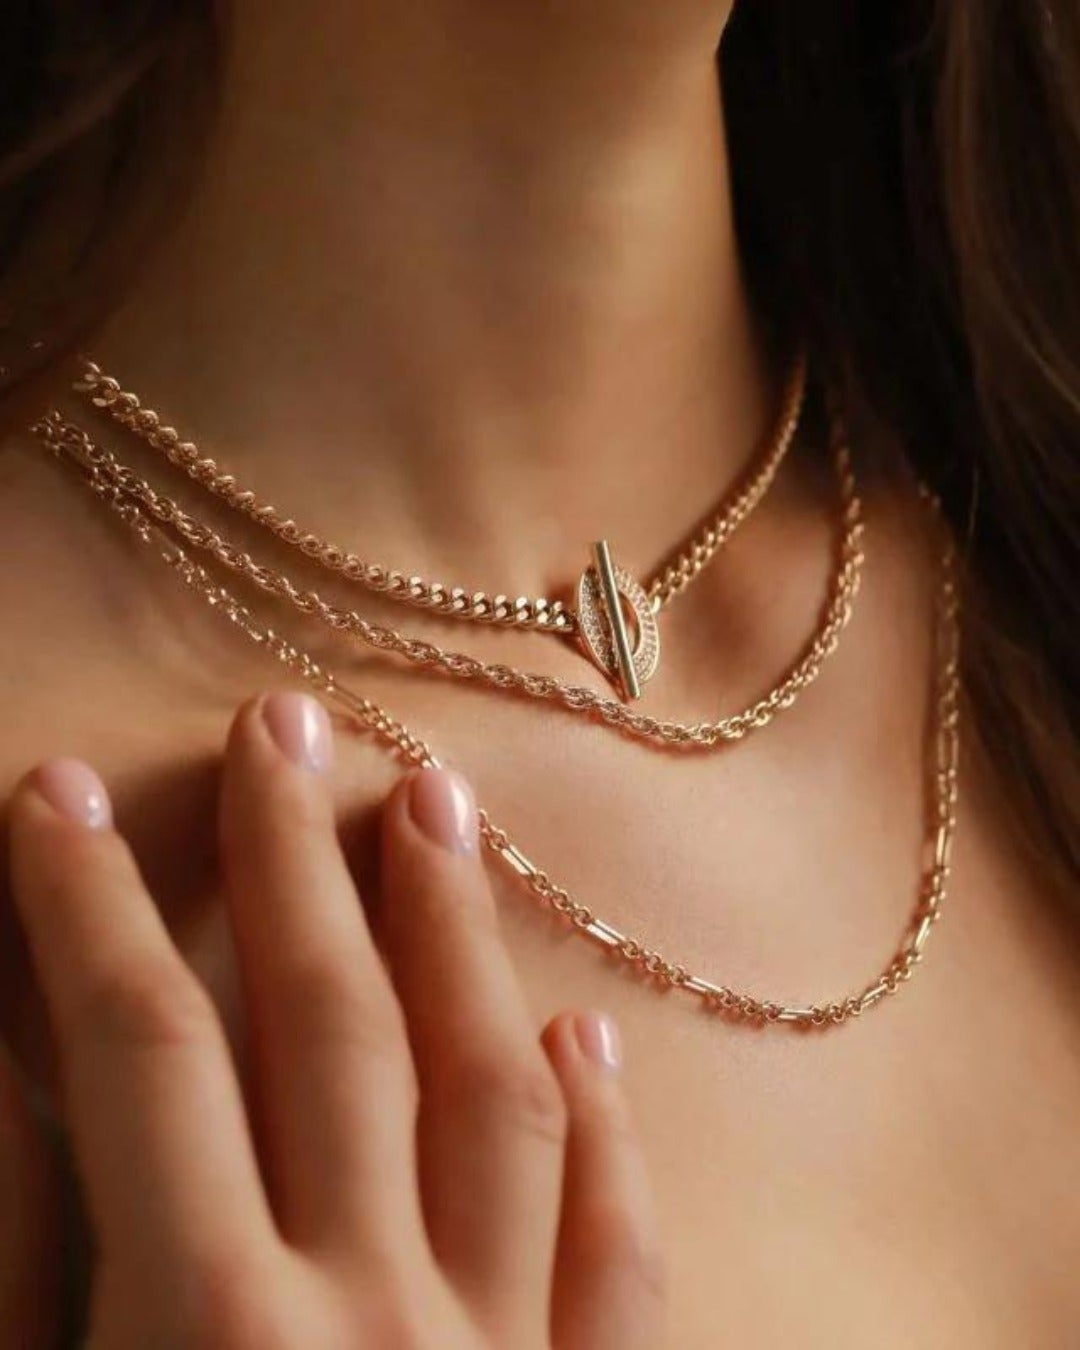 An up close view of a person wearing layered gold necklaces from Joydrop.